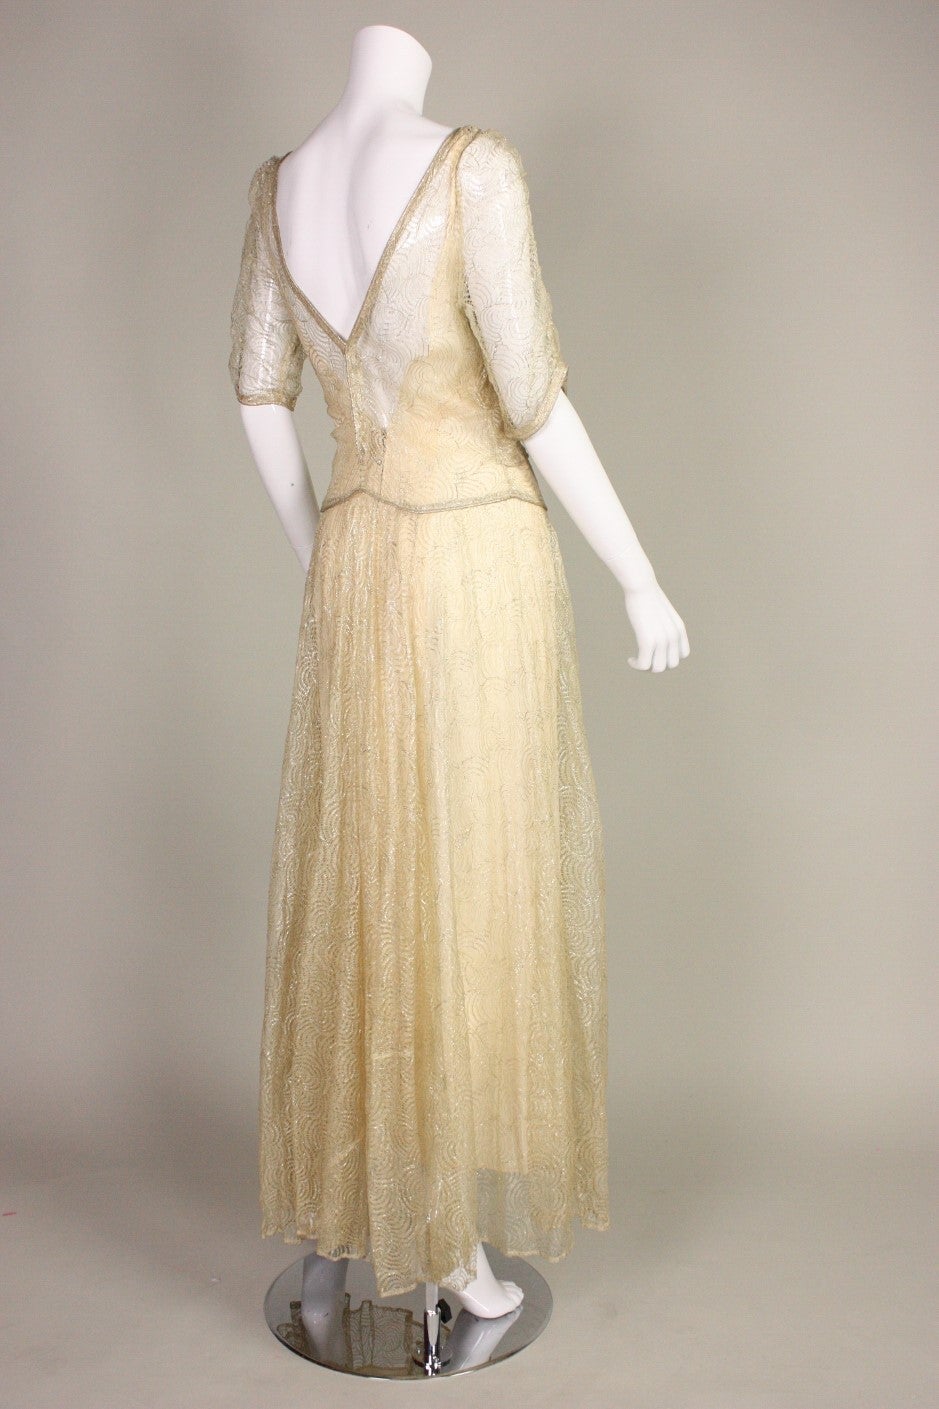 Women's 1930's Lame Lace Gown